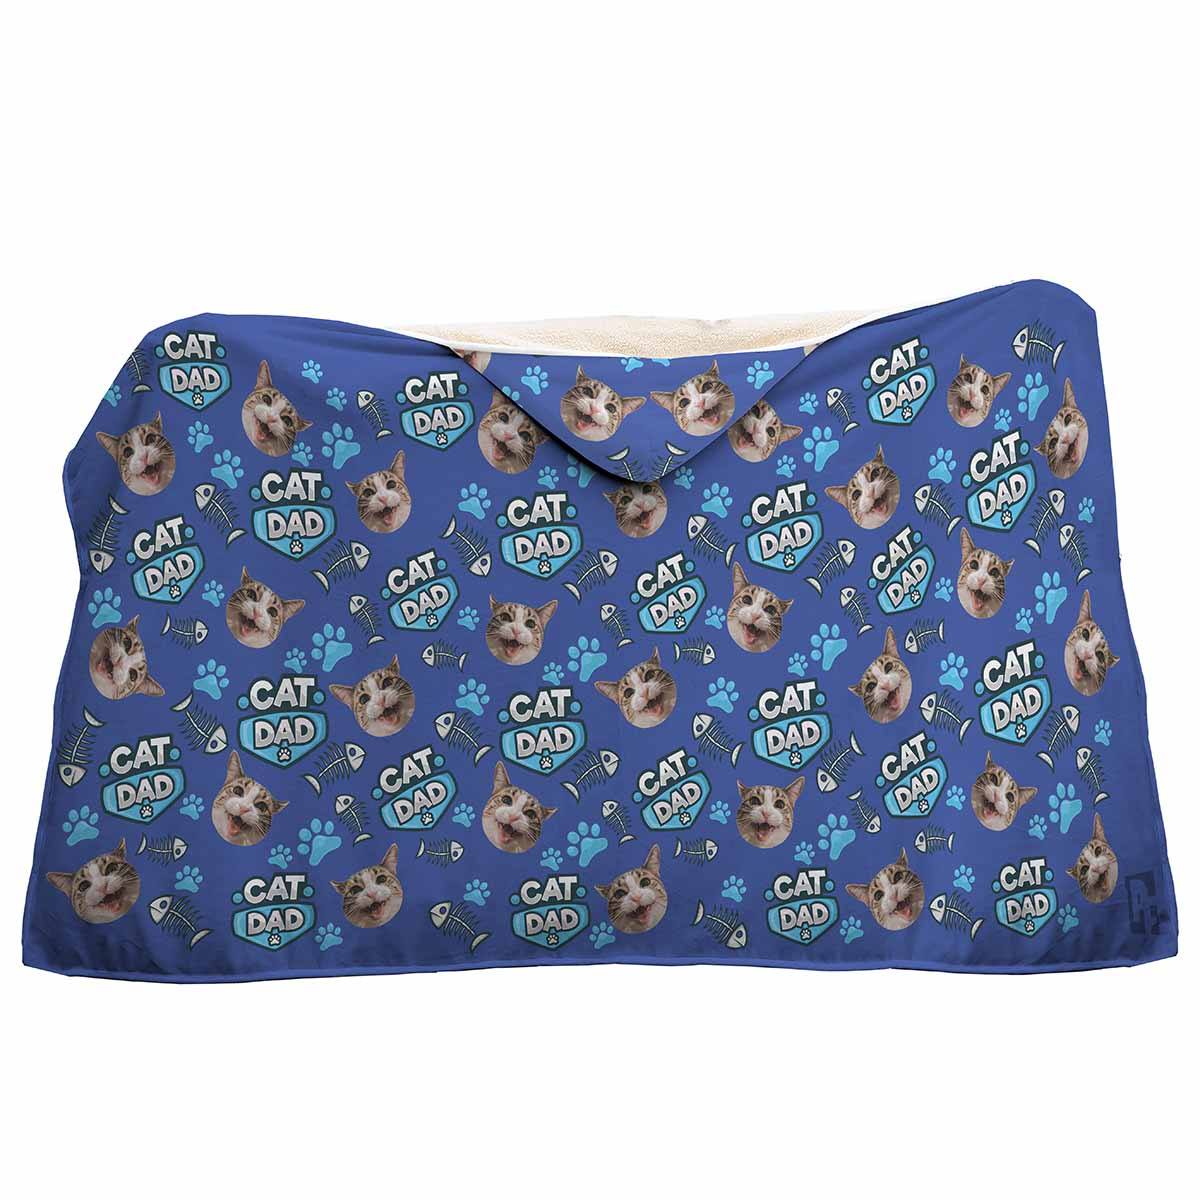 Cat Dad Personalized Hooded Blanket